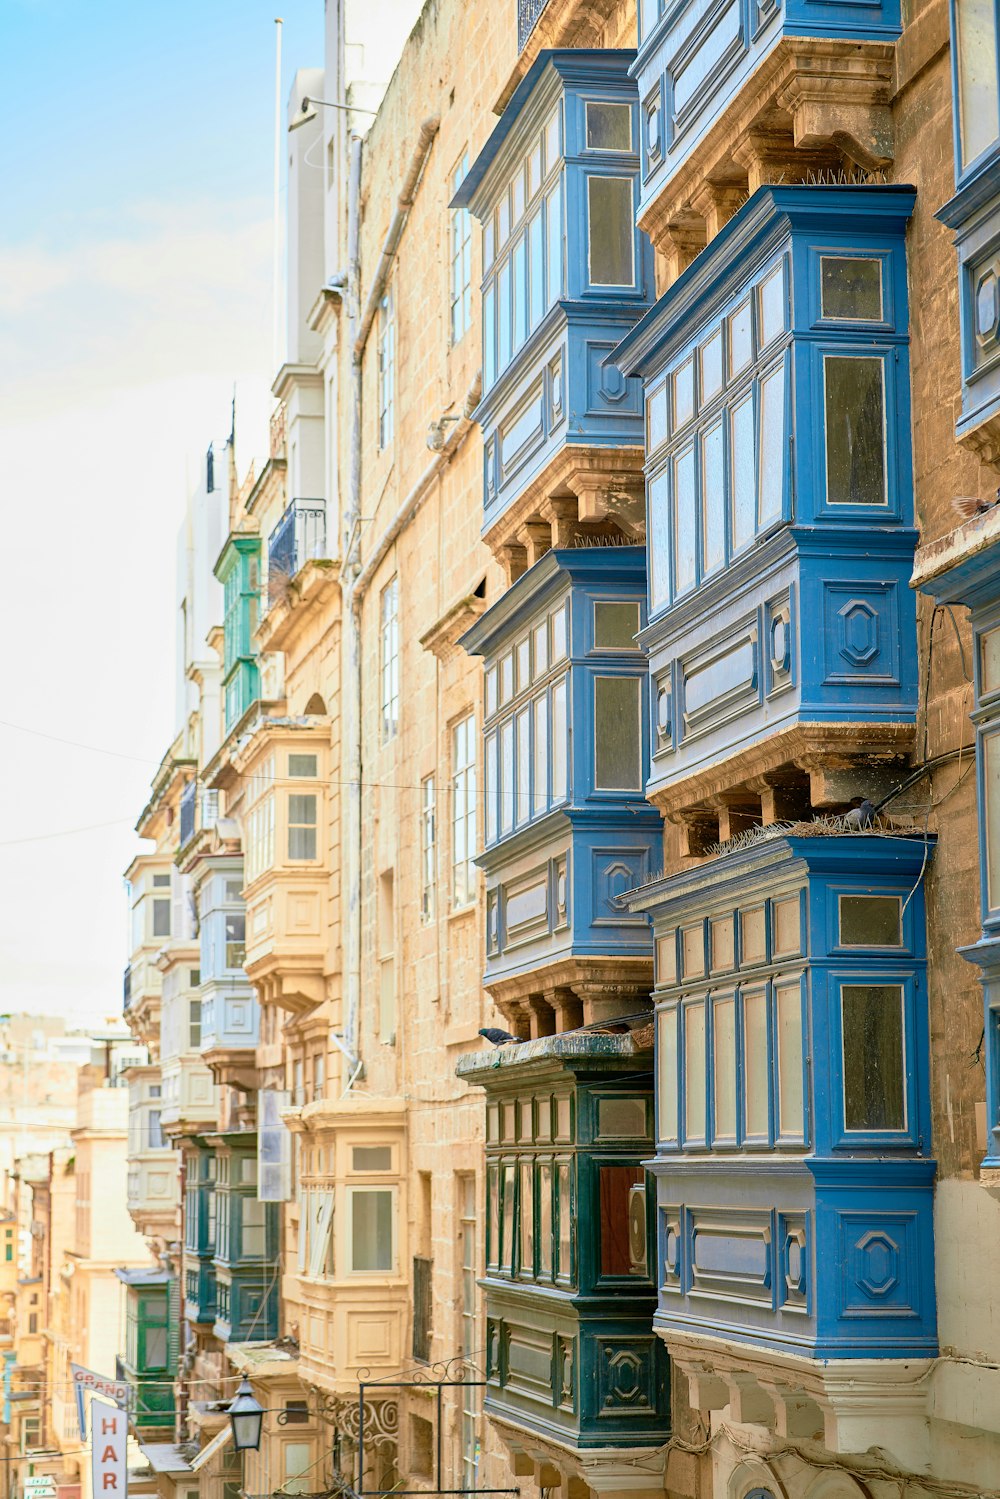 a row of buildings with blue balconies on the windows